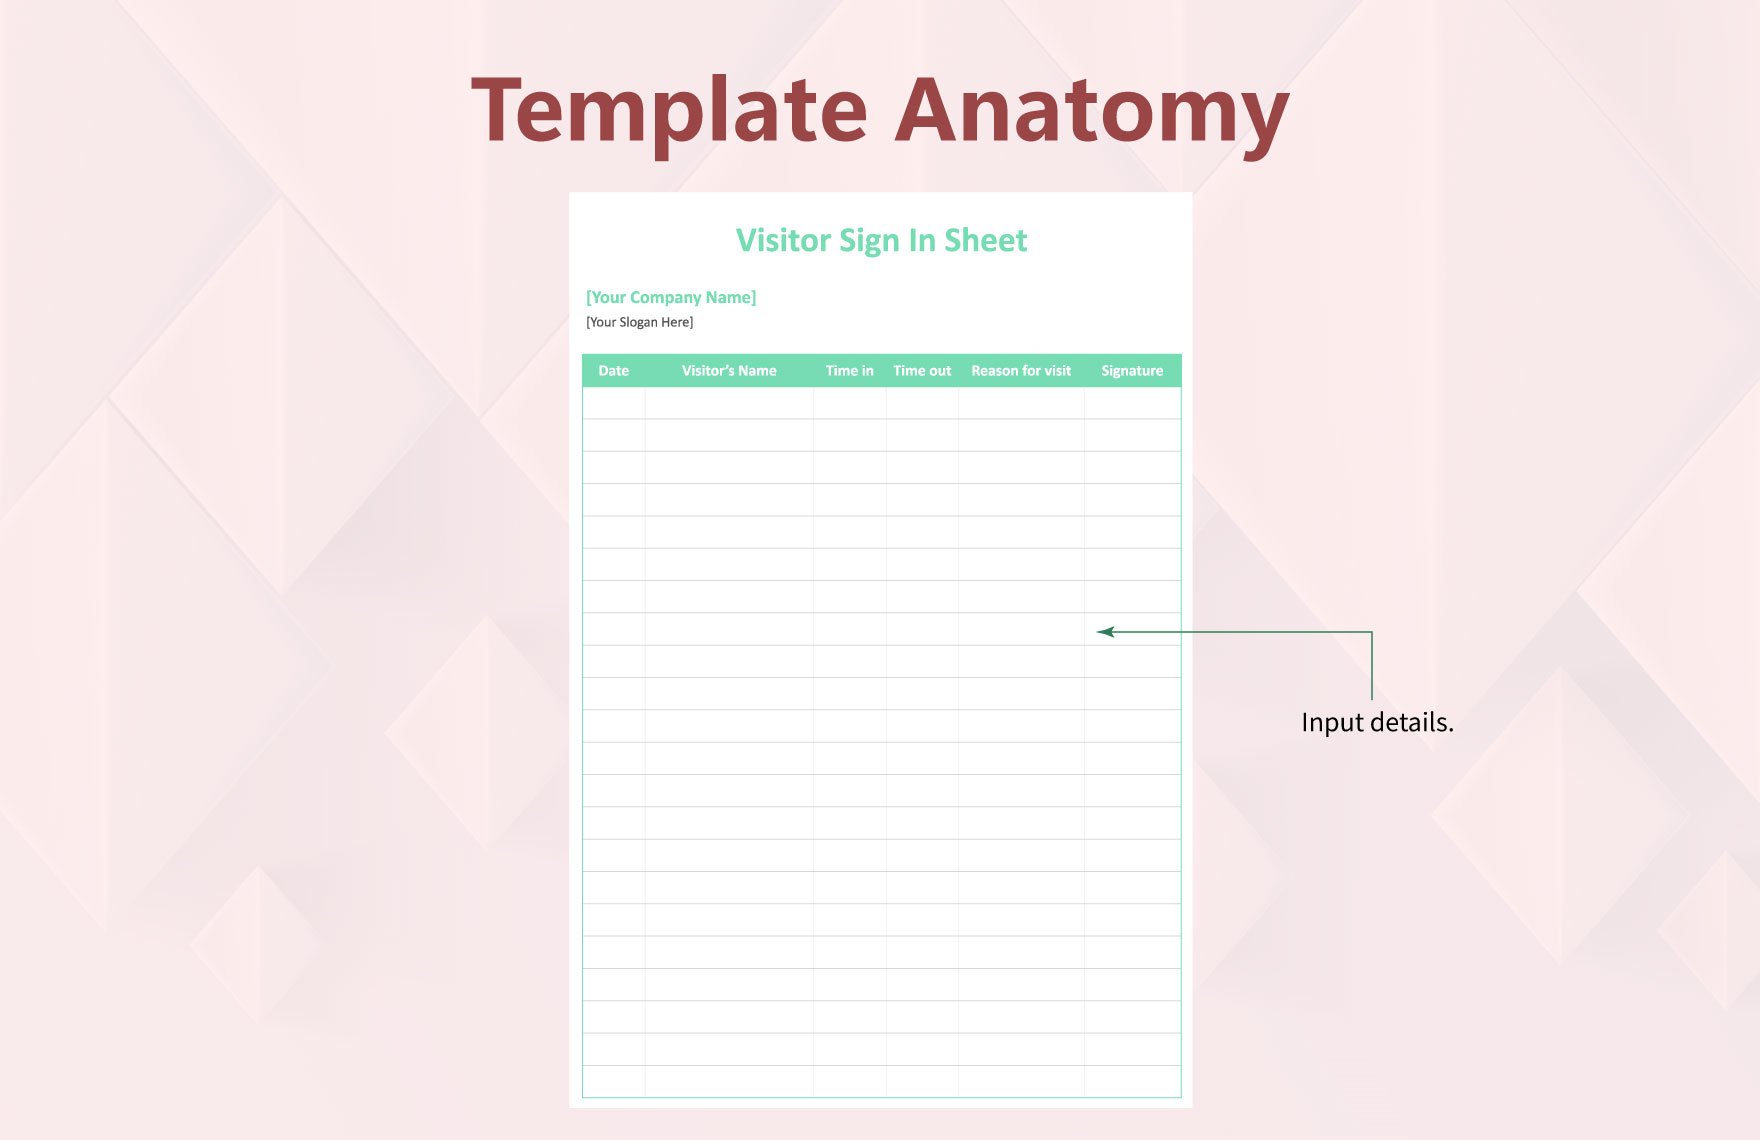 Visitor Sign in Sheet Template